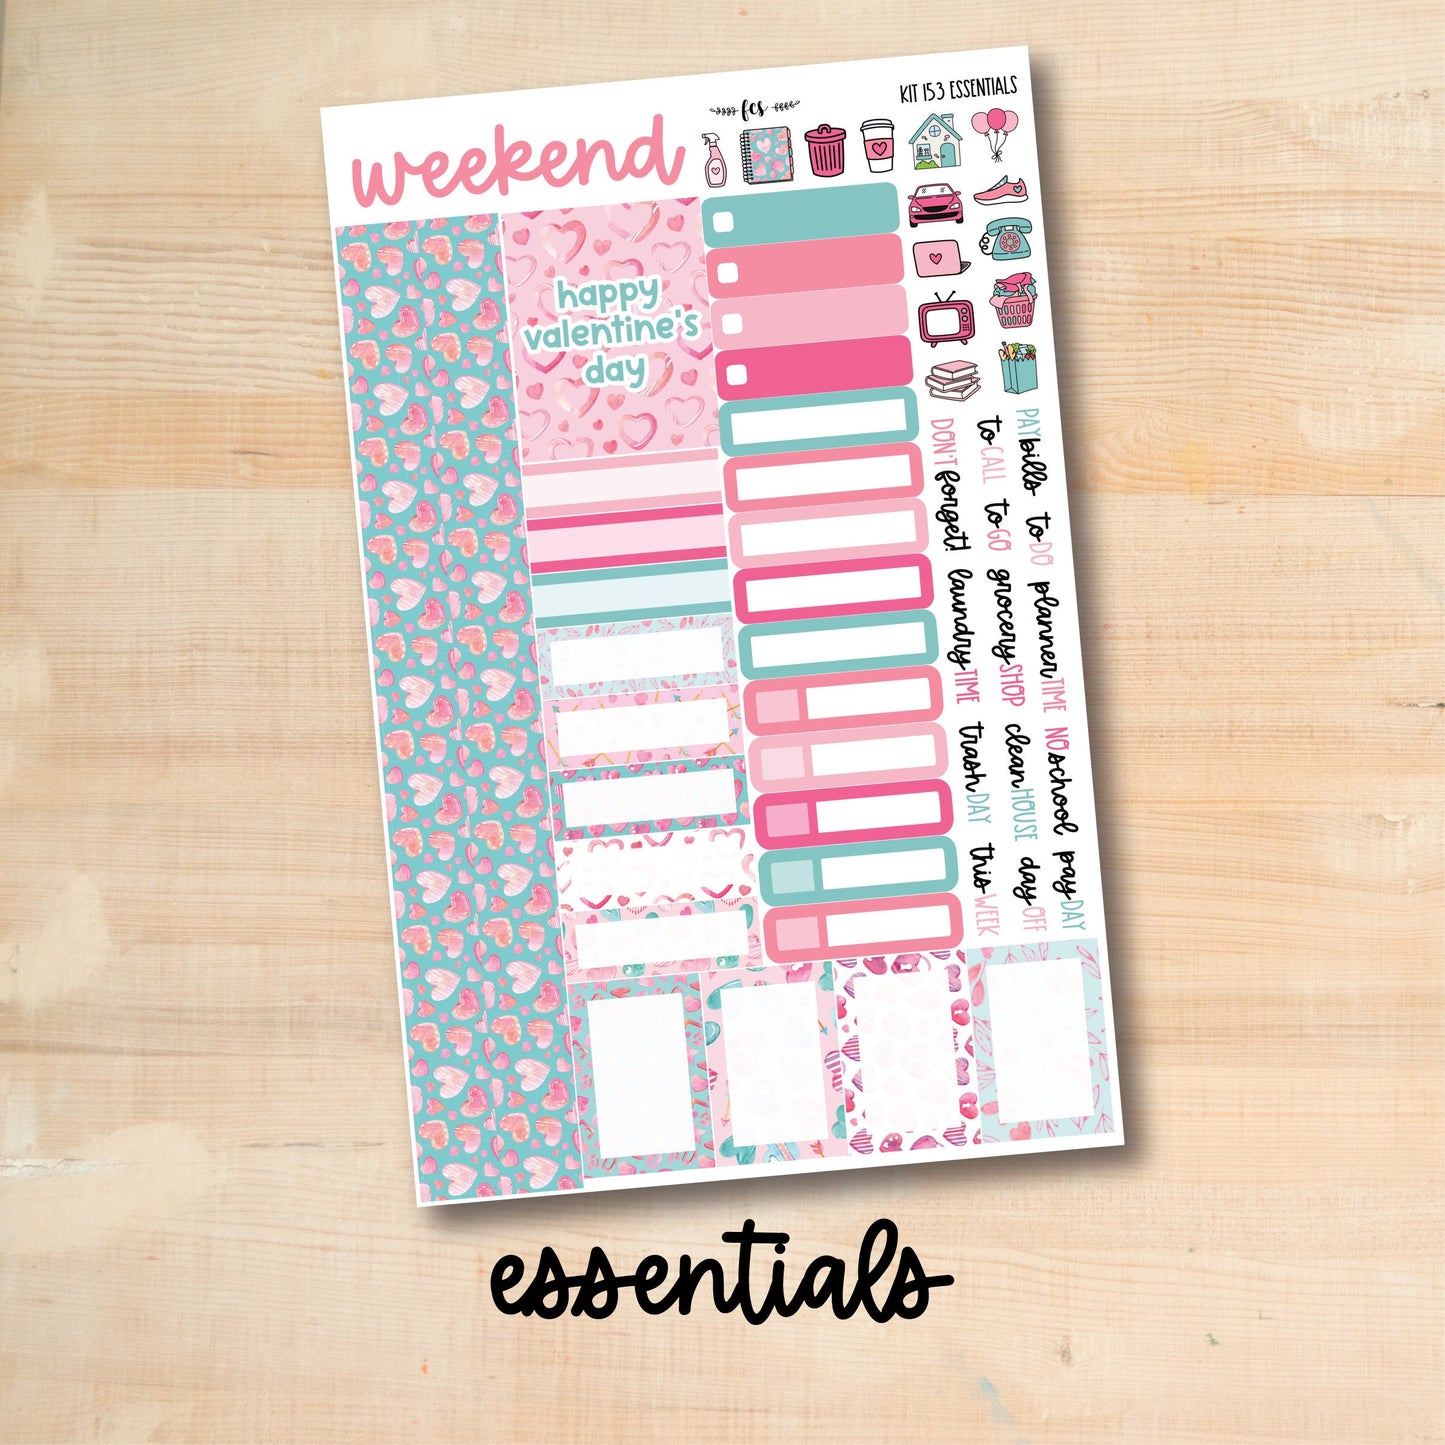 KIT-153 || MY VALENTINE weekly planner kit for Erin Condren, Plum Paper, MakseLife and more!